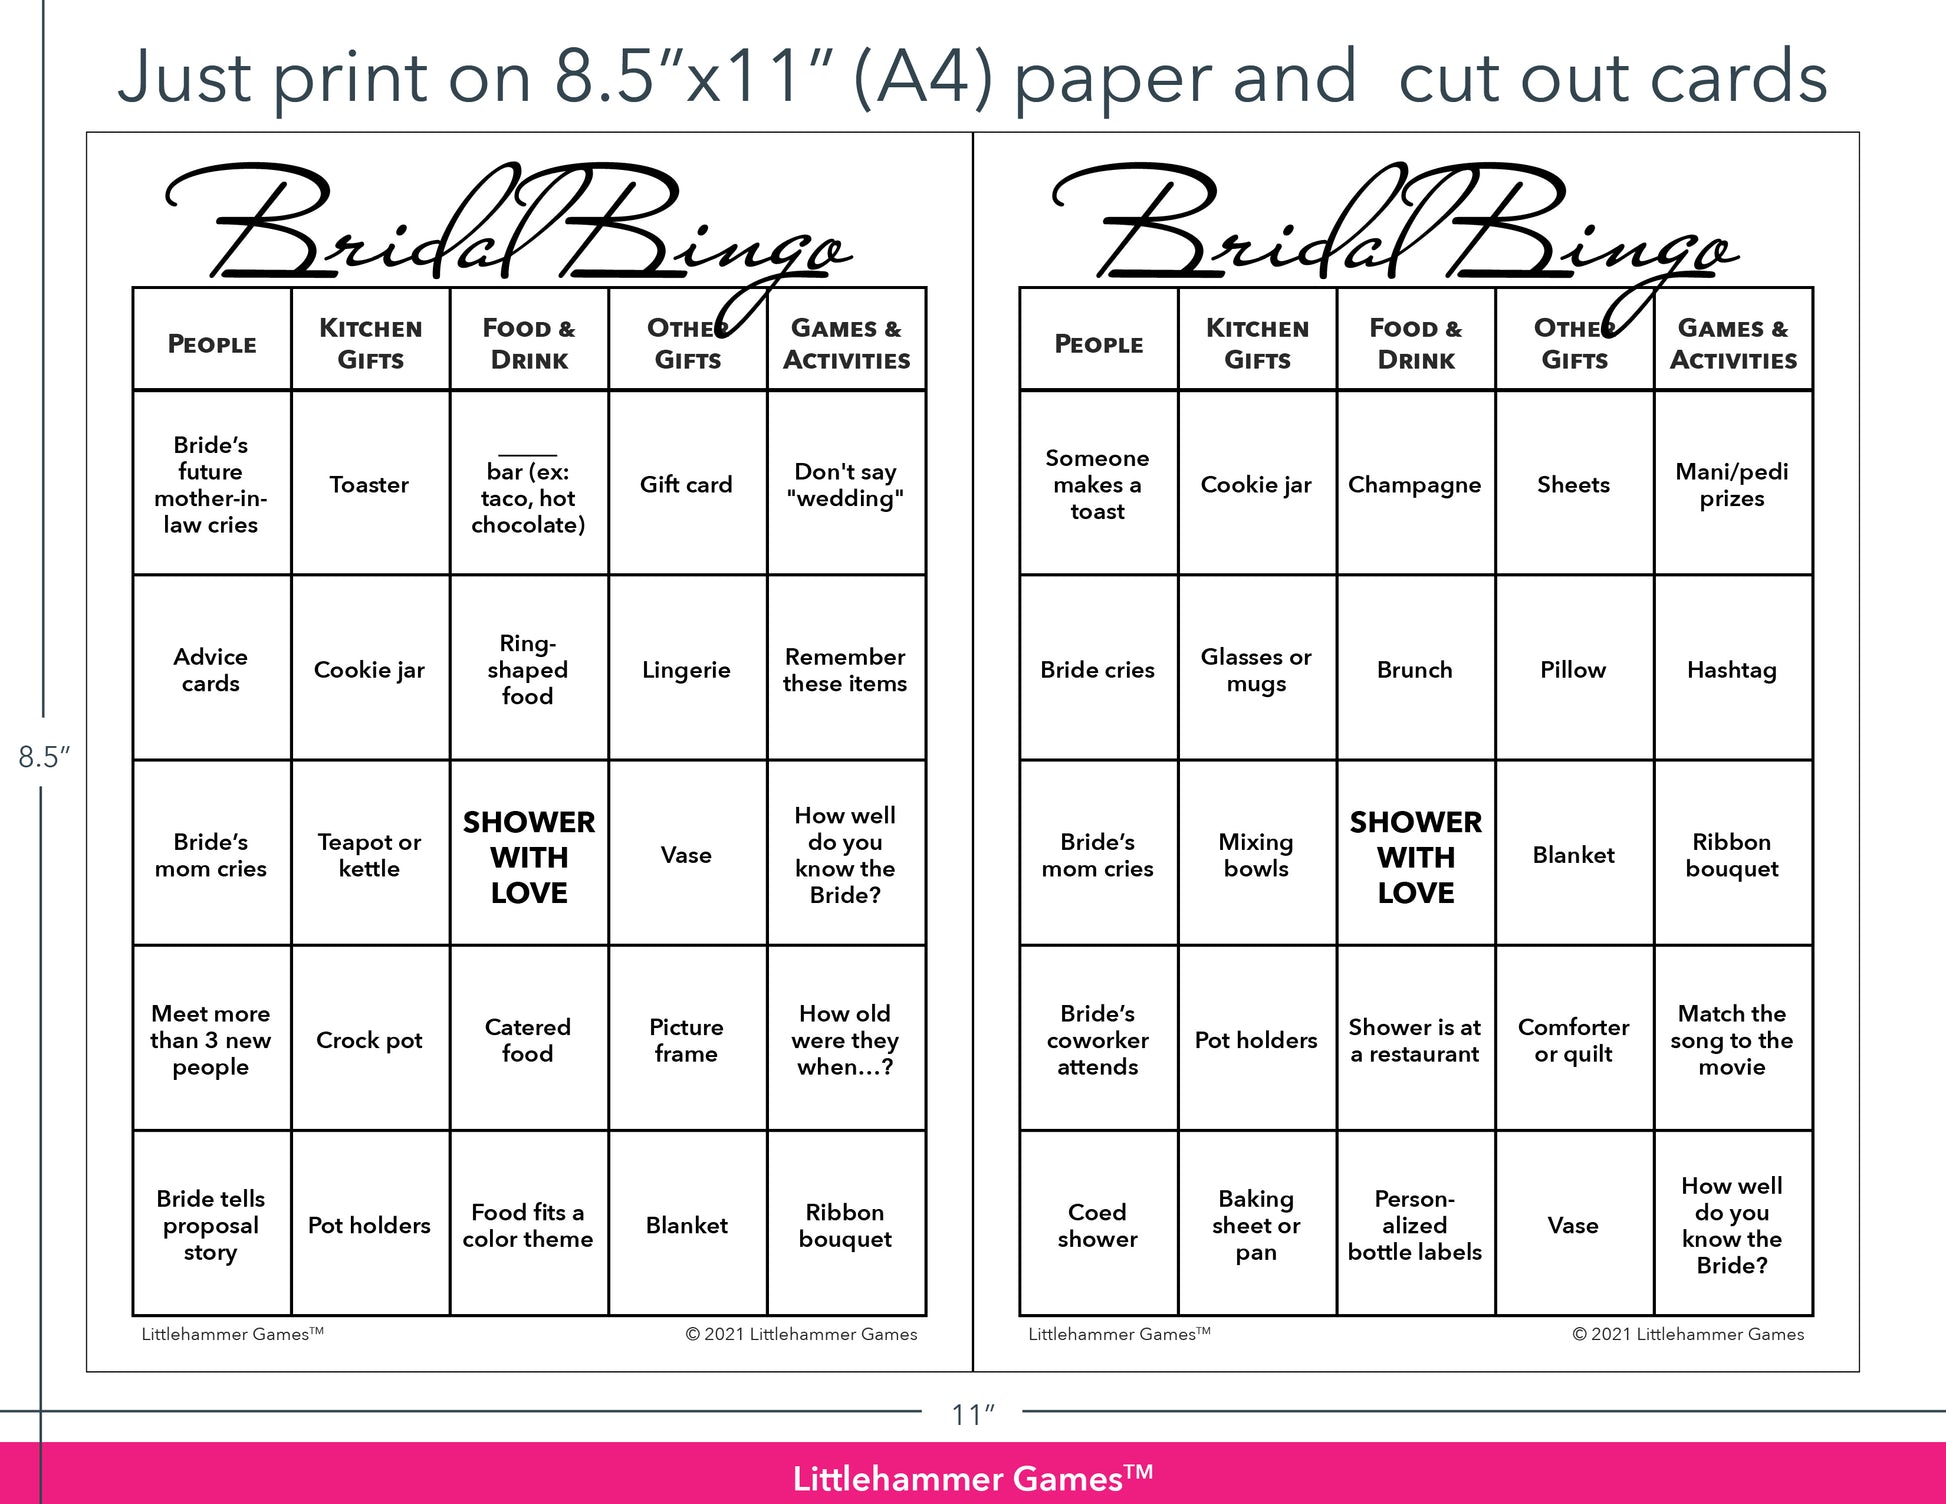 Minimalist black and white Bridal Bingo game cards with printing instructions